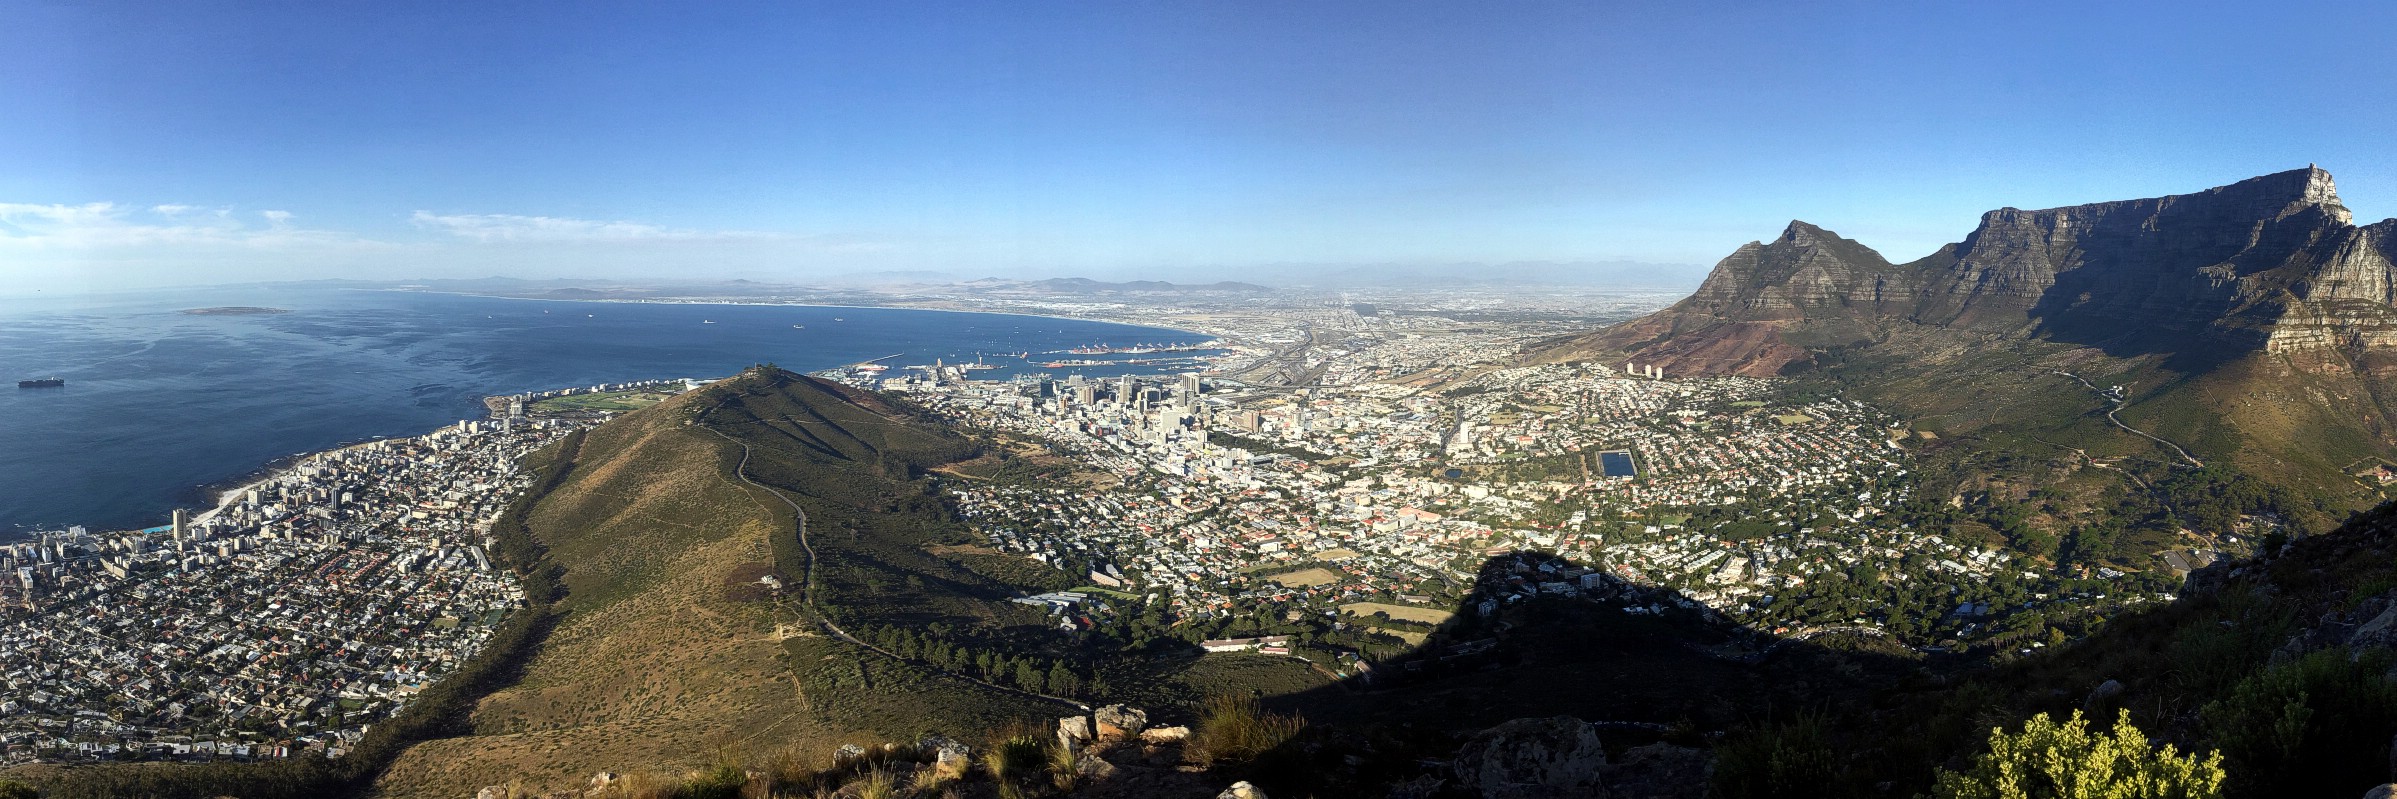 A panorama of (L-R) Table Bay, Signal Hill, Cape Town & Table Mountain as seen from the top of Lion's Head, Western Cape, South Africa. February 22, 2017.